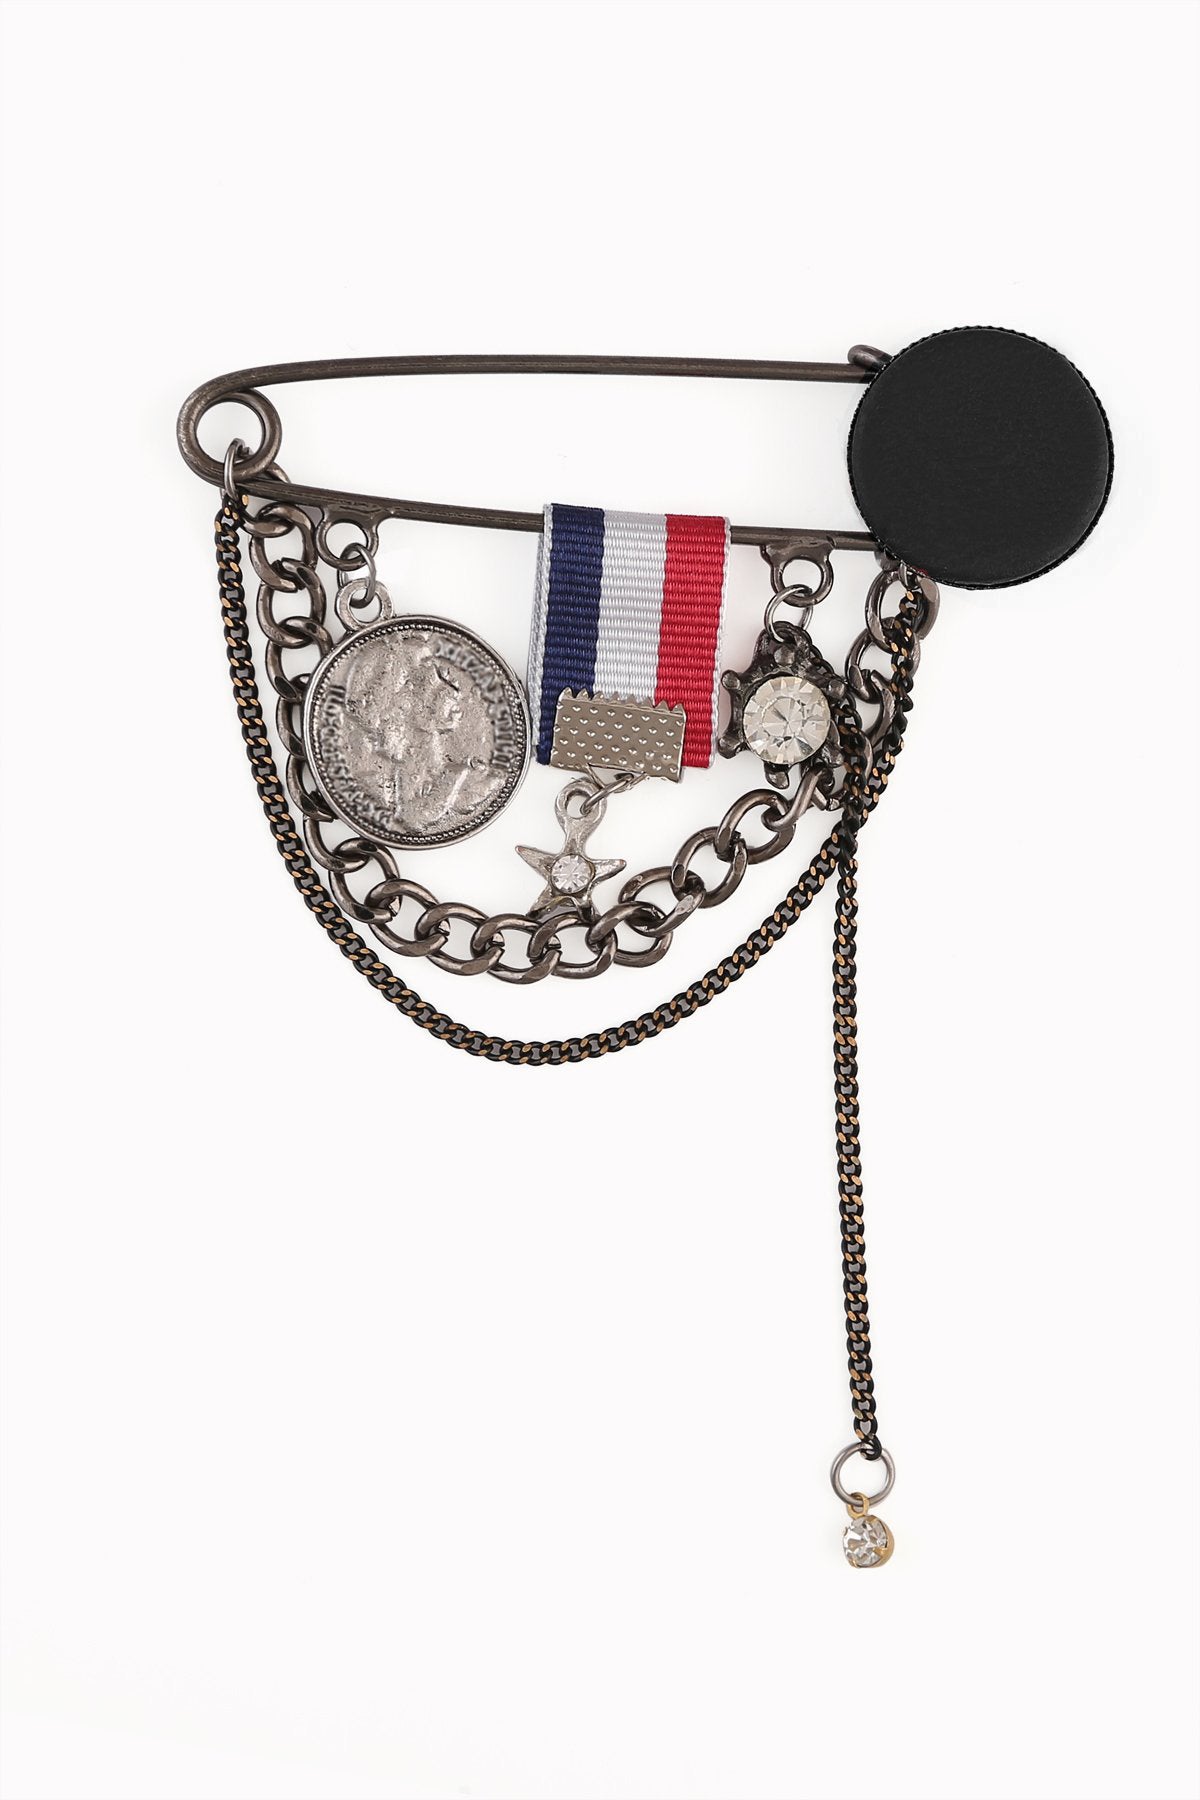 Elegant Flag and Coin Chain Hanging Black Nickel Safety Pin Brooch